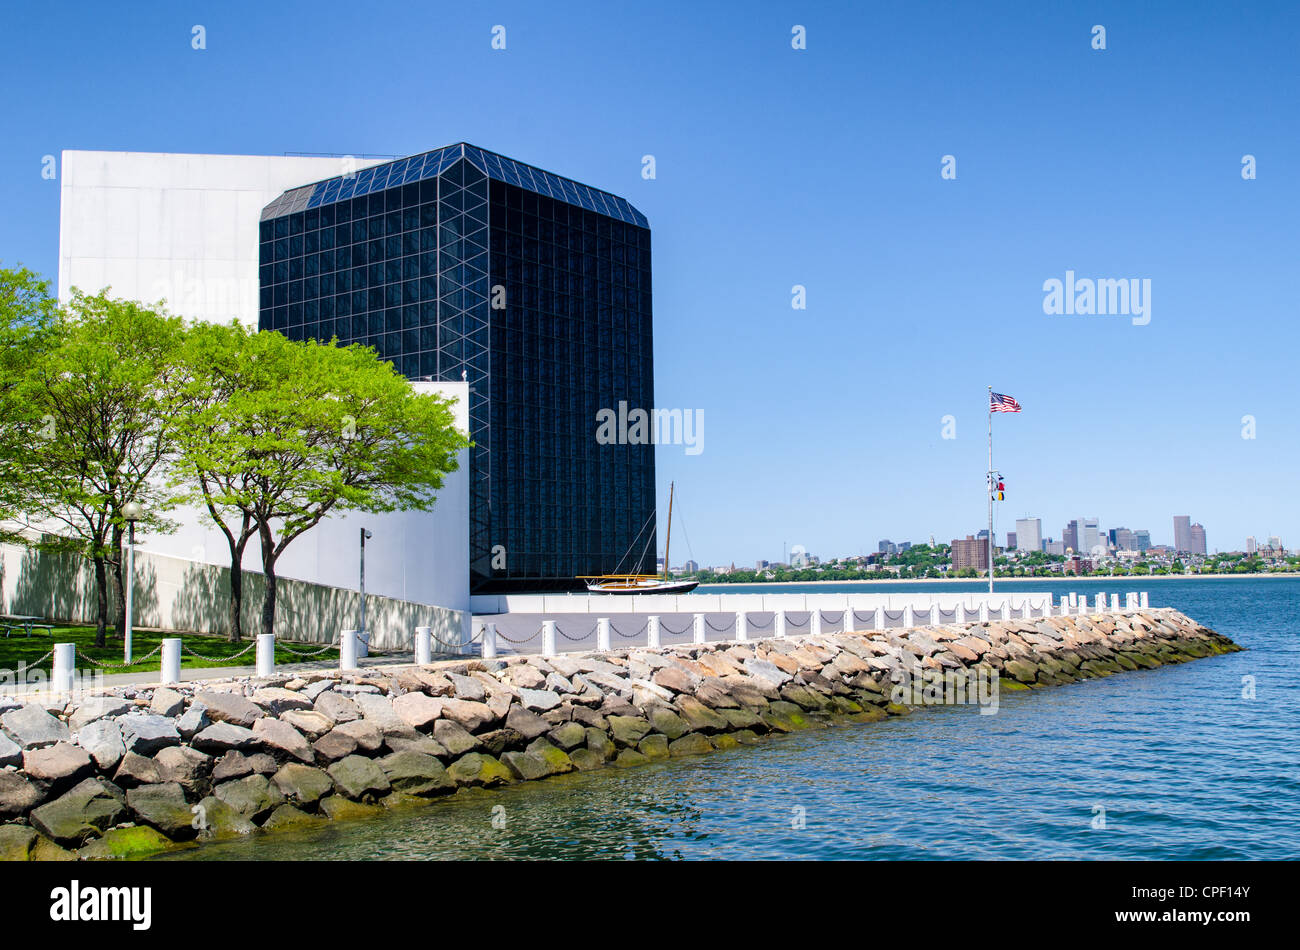 Waterfront of the the John F. Kennedy Presidential Library and Museum on the waterfront in Dorchester in Boston, Massachusetts. Dedicated to the 35th president of the United States, the JFK Library is the official National Archves and Records Administration repository of the presidential records of John F. Kennedy. The highrises of downtown Boston are in the background at right of frame. Stock Photo